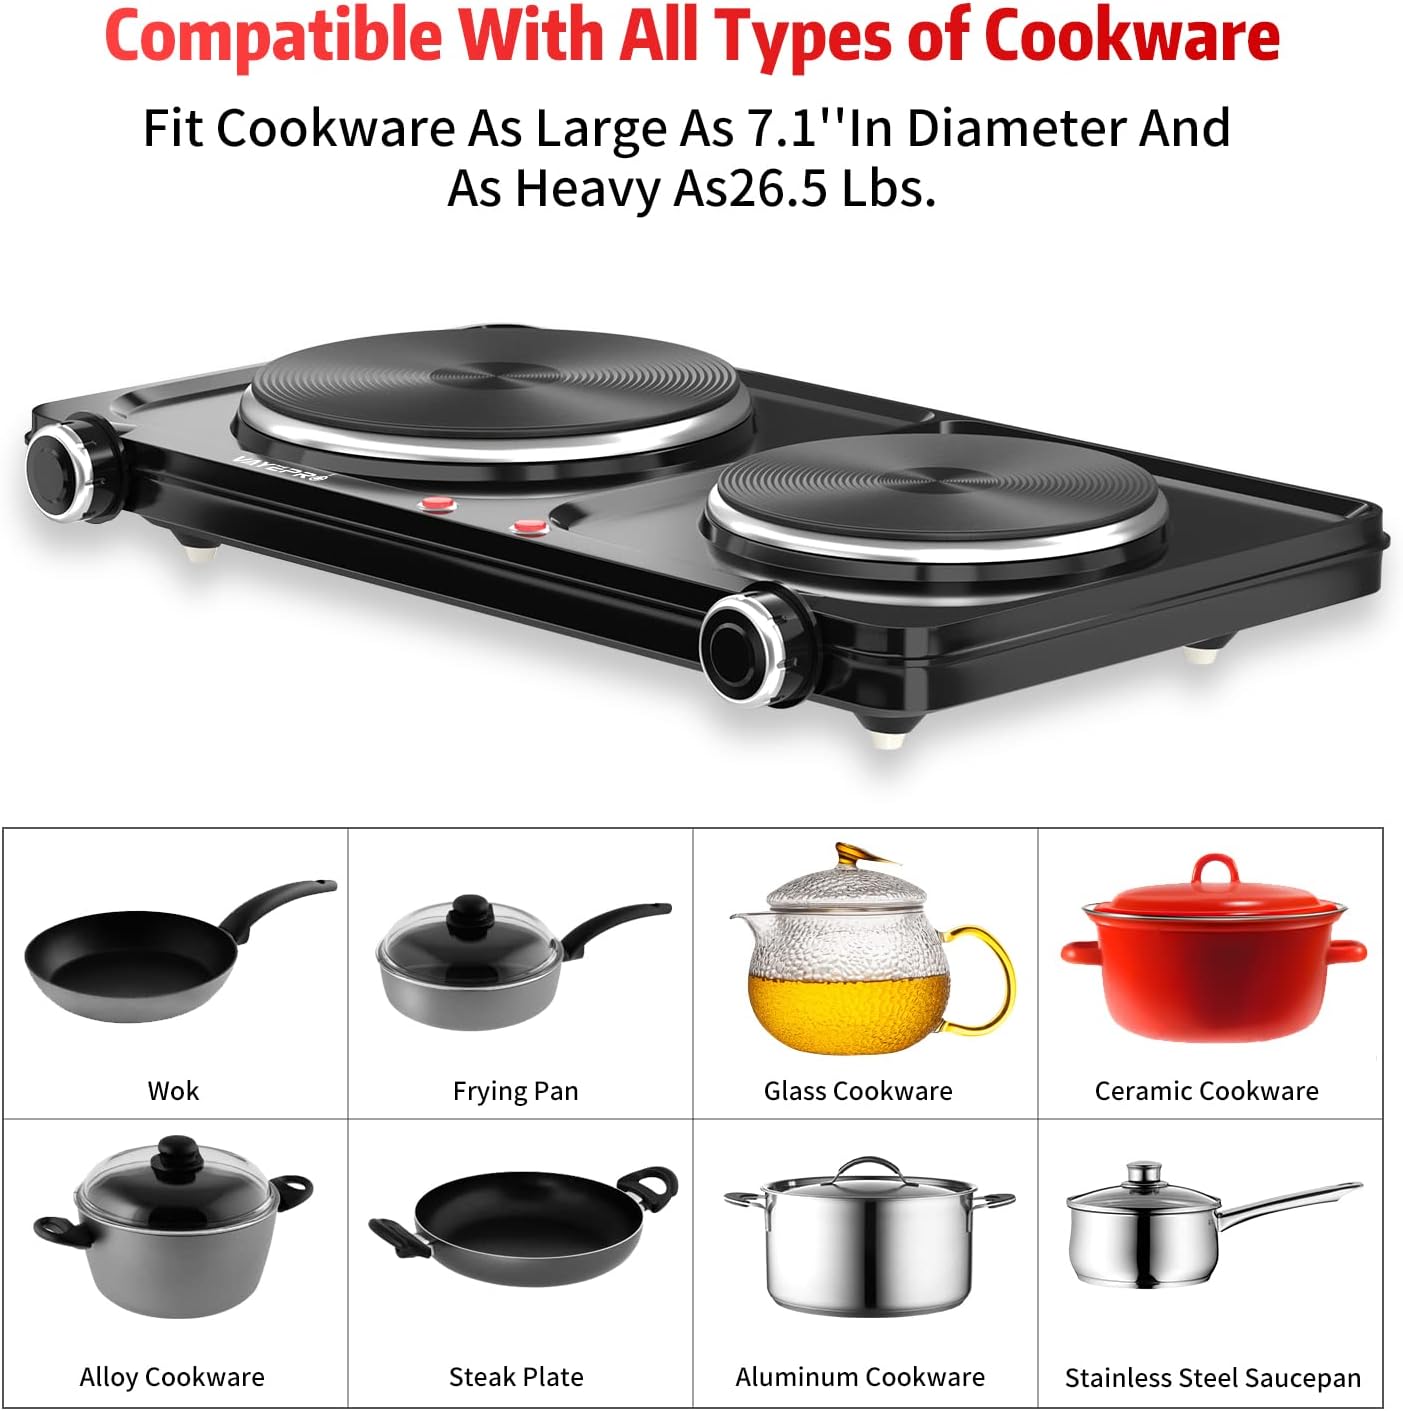 1800W Electric Hot Plate, Countertop Stove Double Burner for